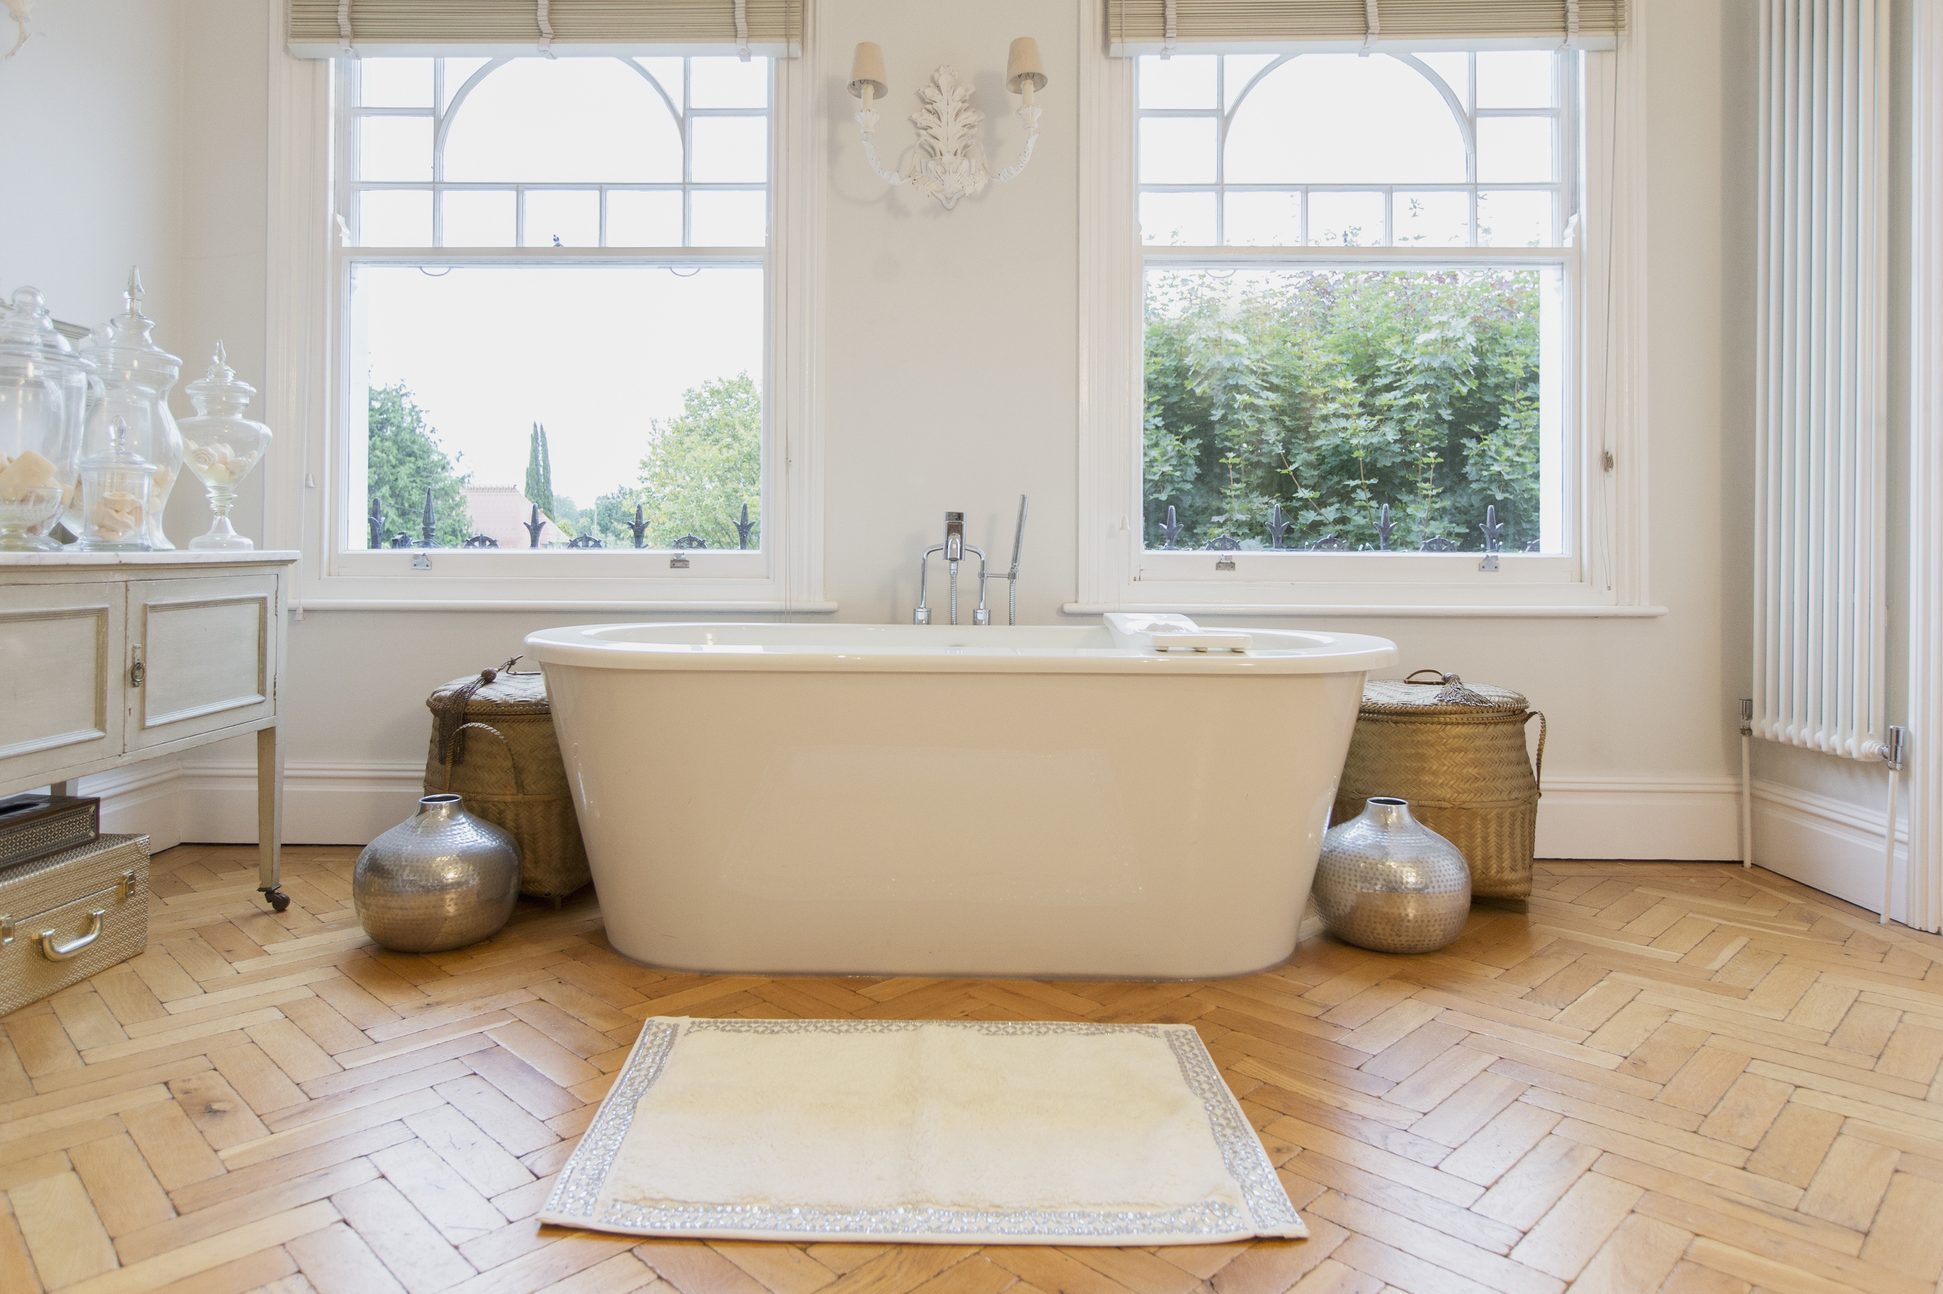 Expert's Guide to Washing Bathroom Rugs Safely